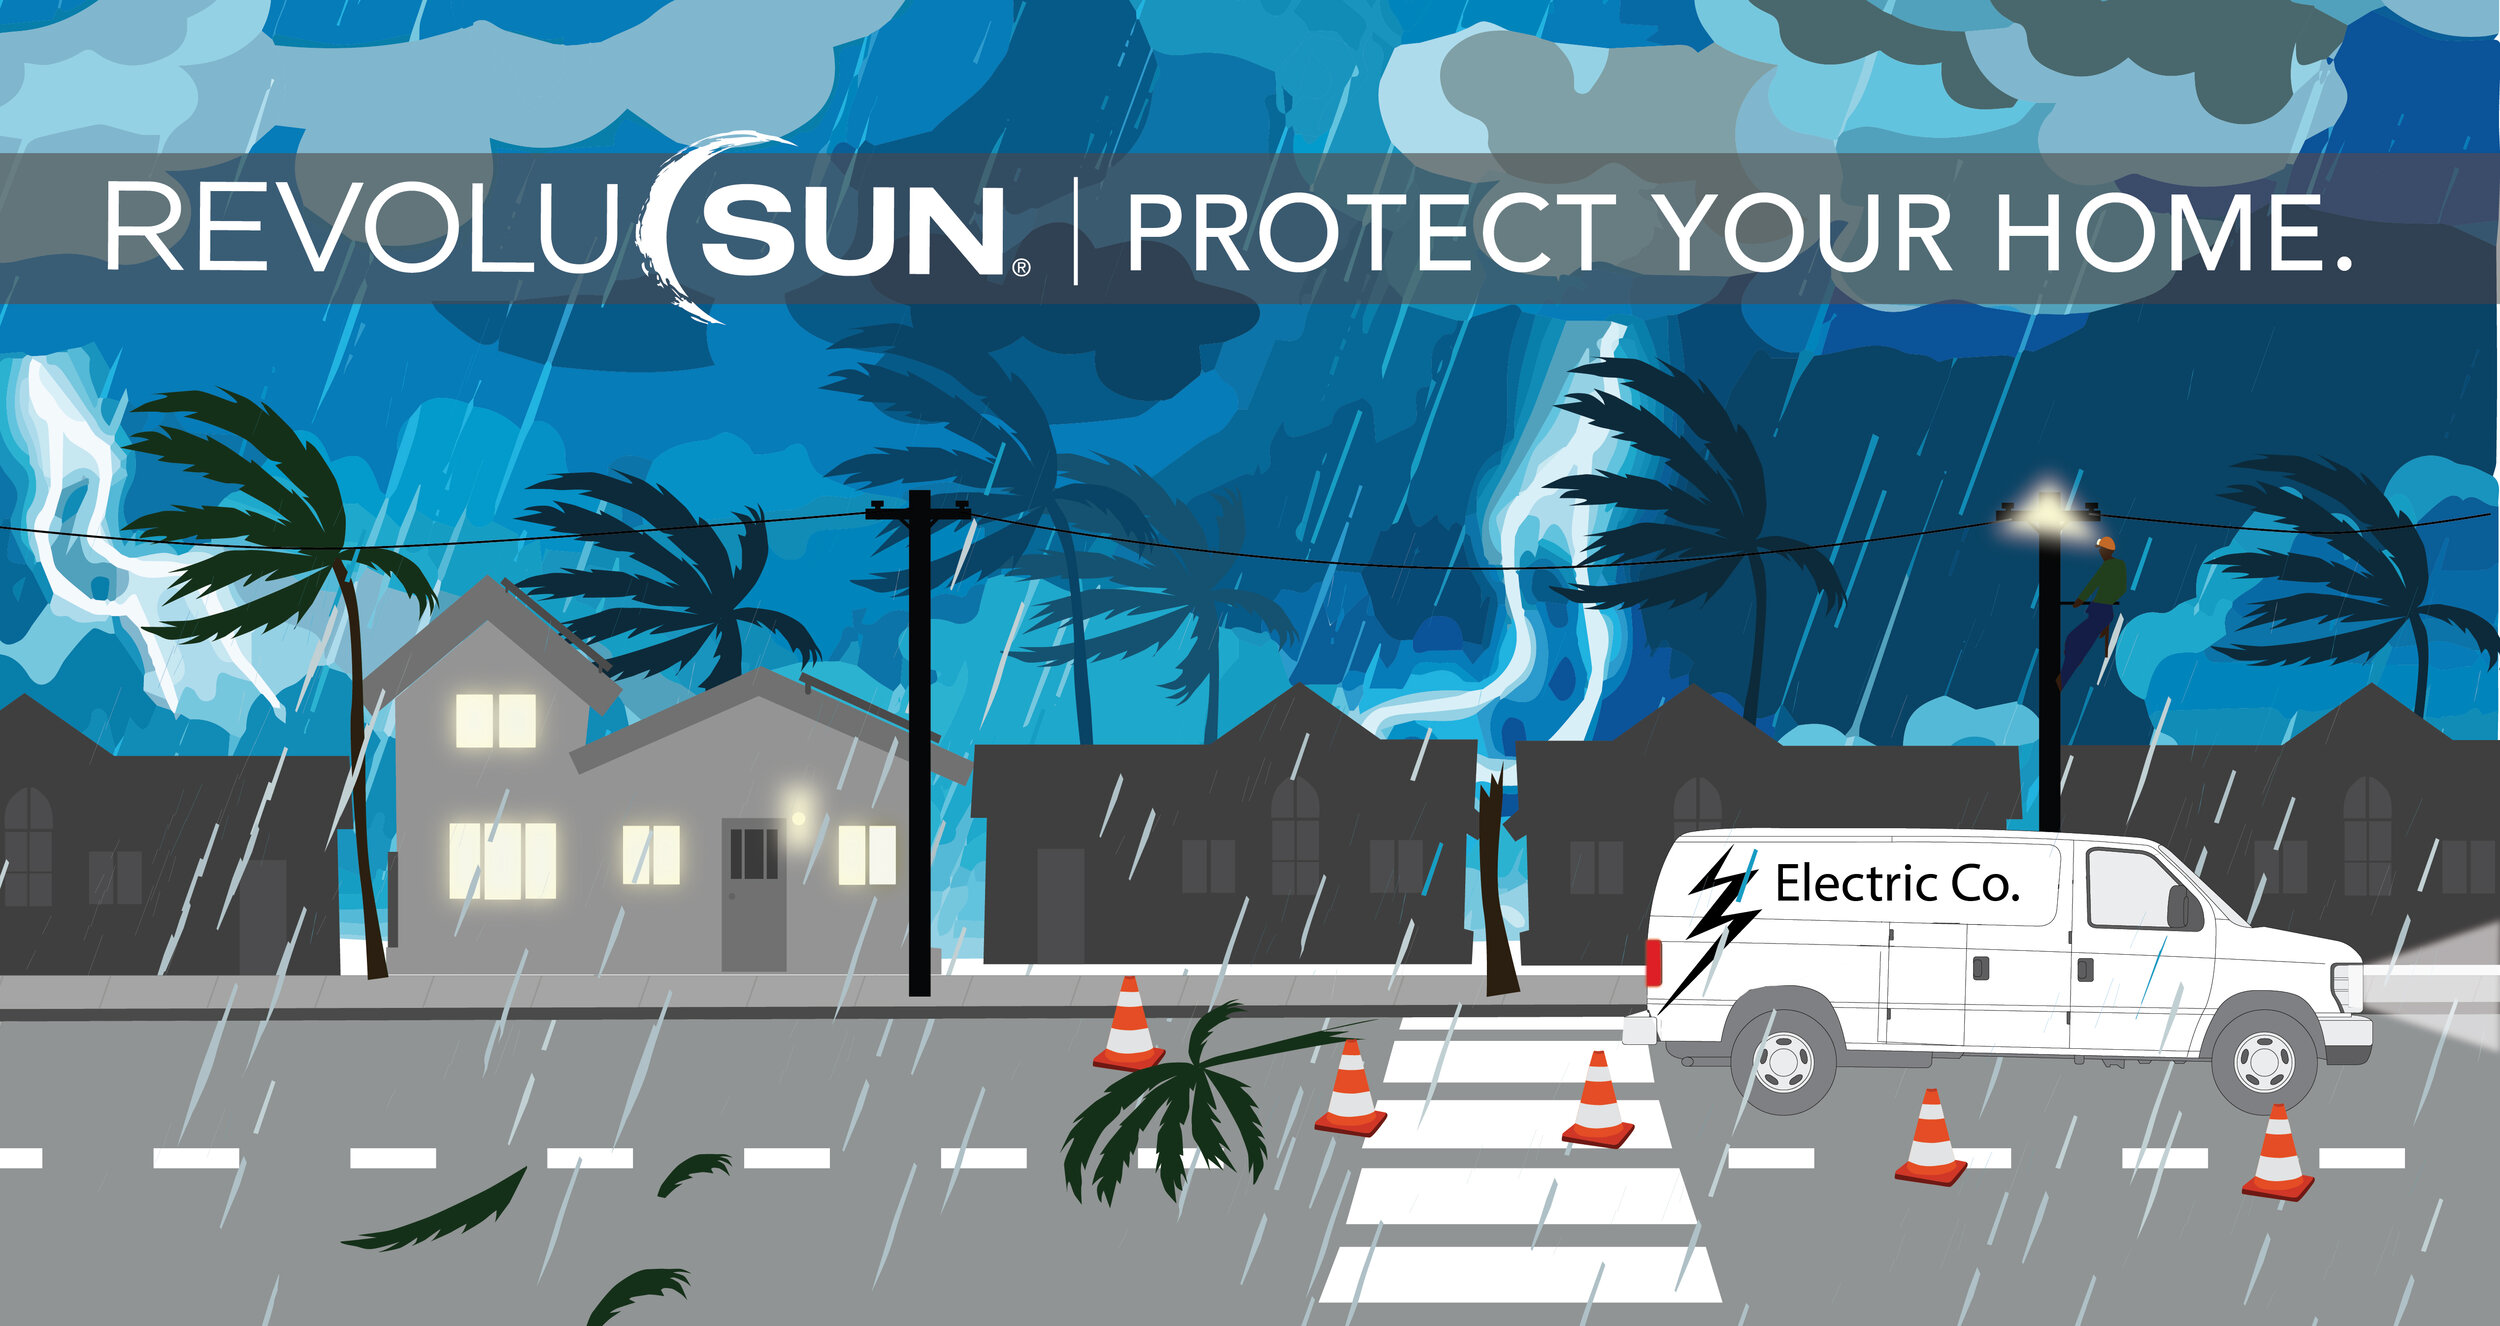 Stormy night_solar protect your home-02.jpg